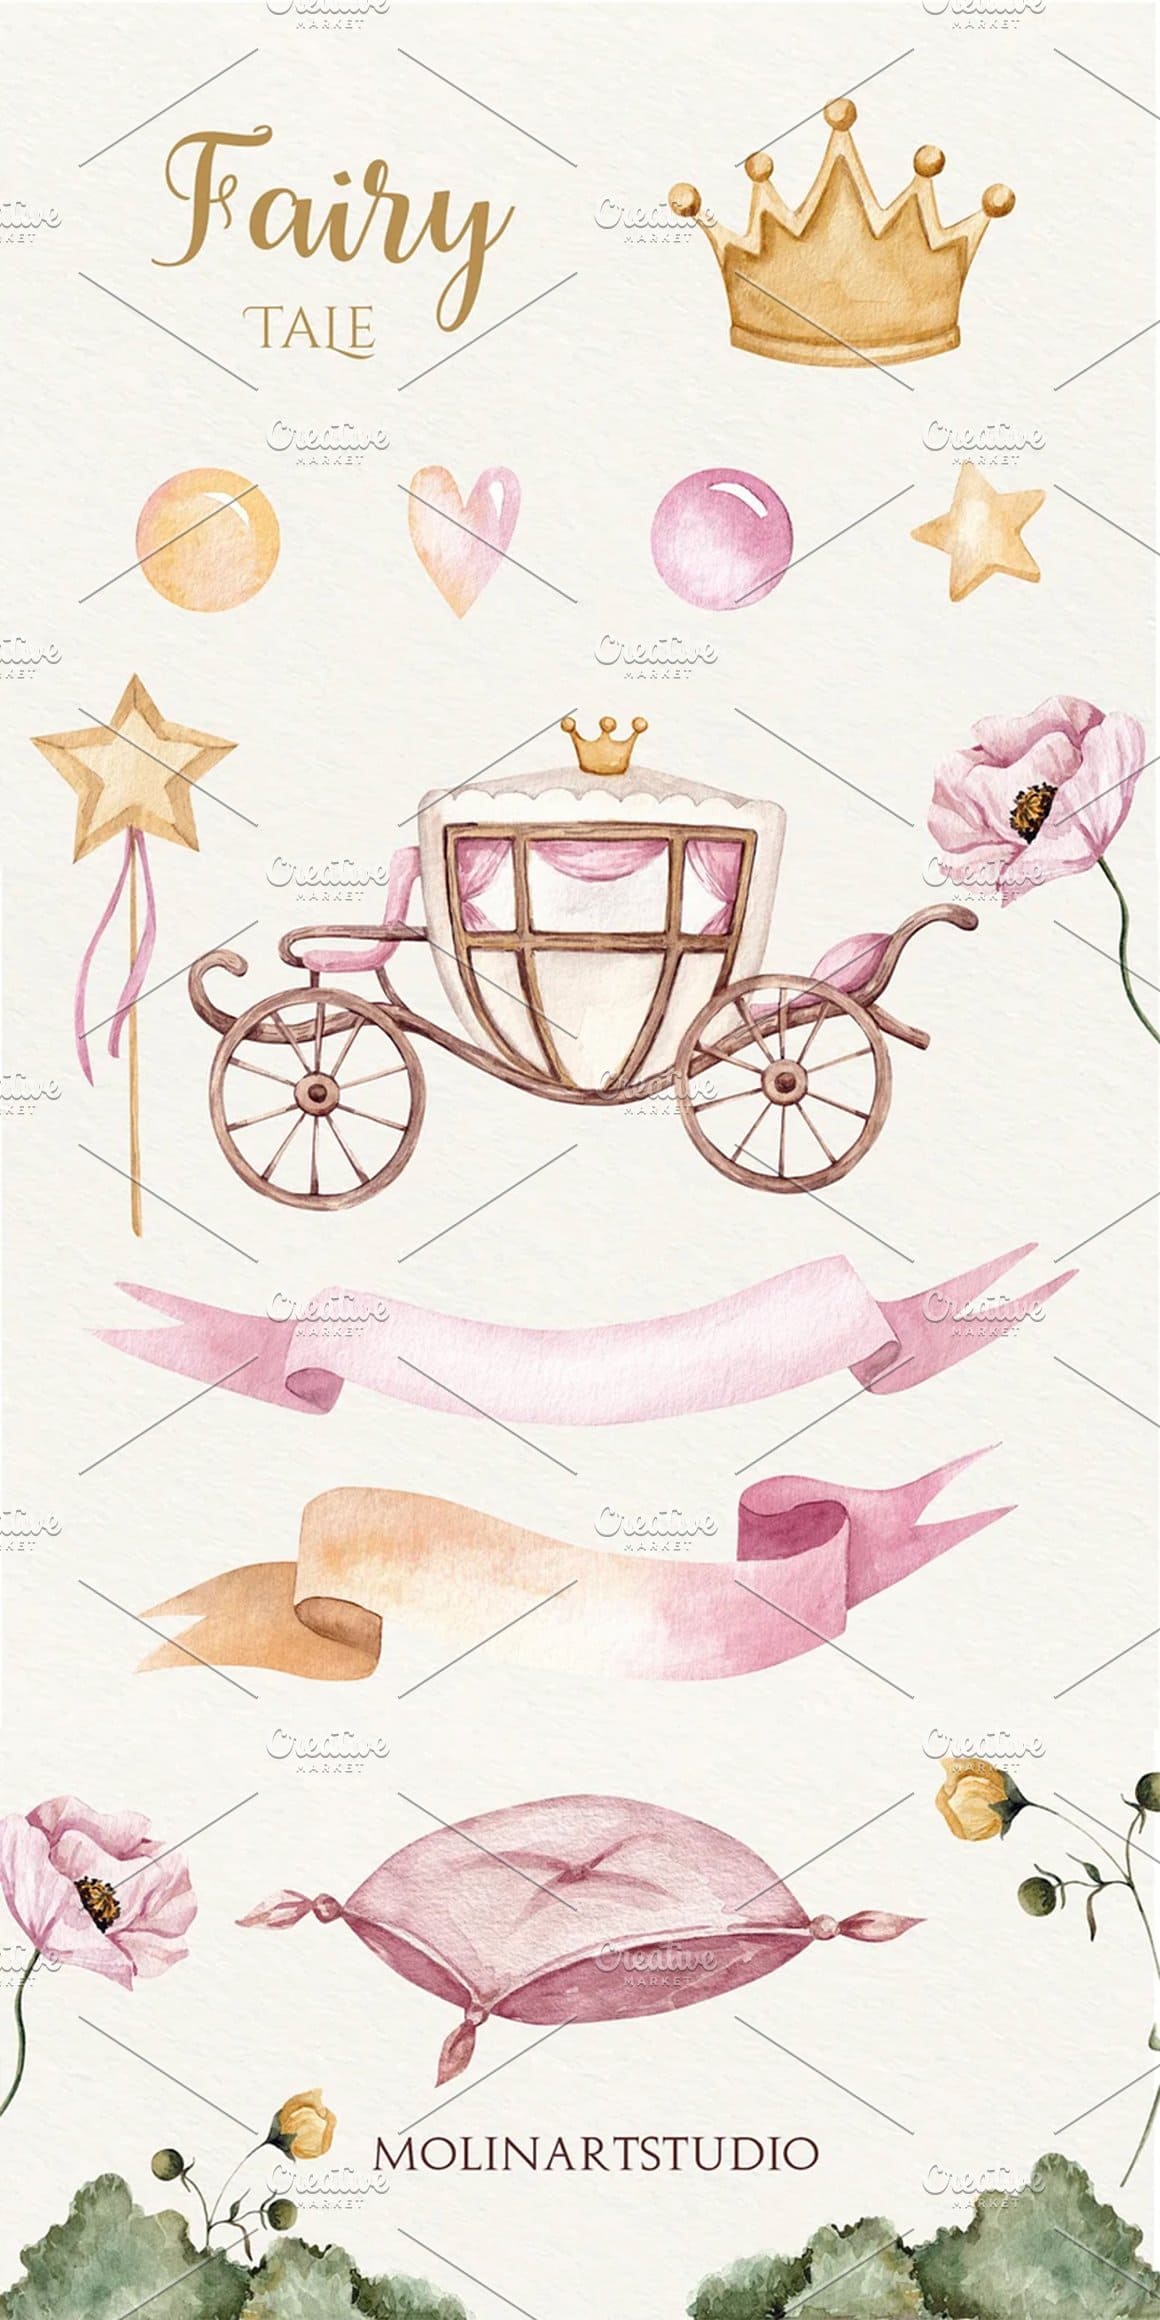 Pillows, a princess crown and a chariot from a fairy tale.